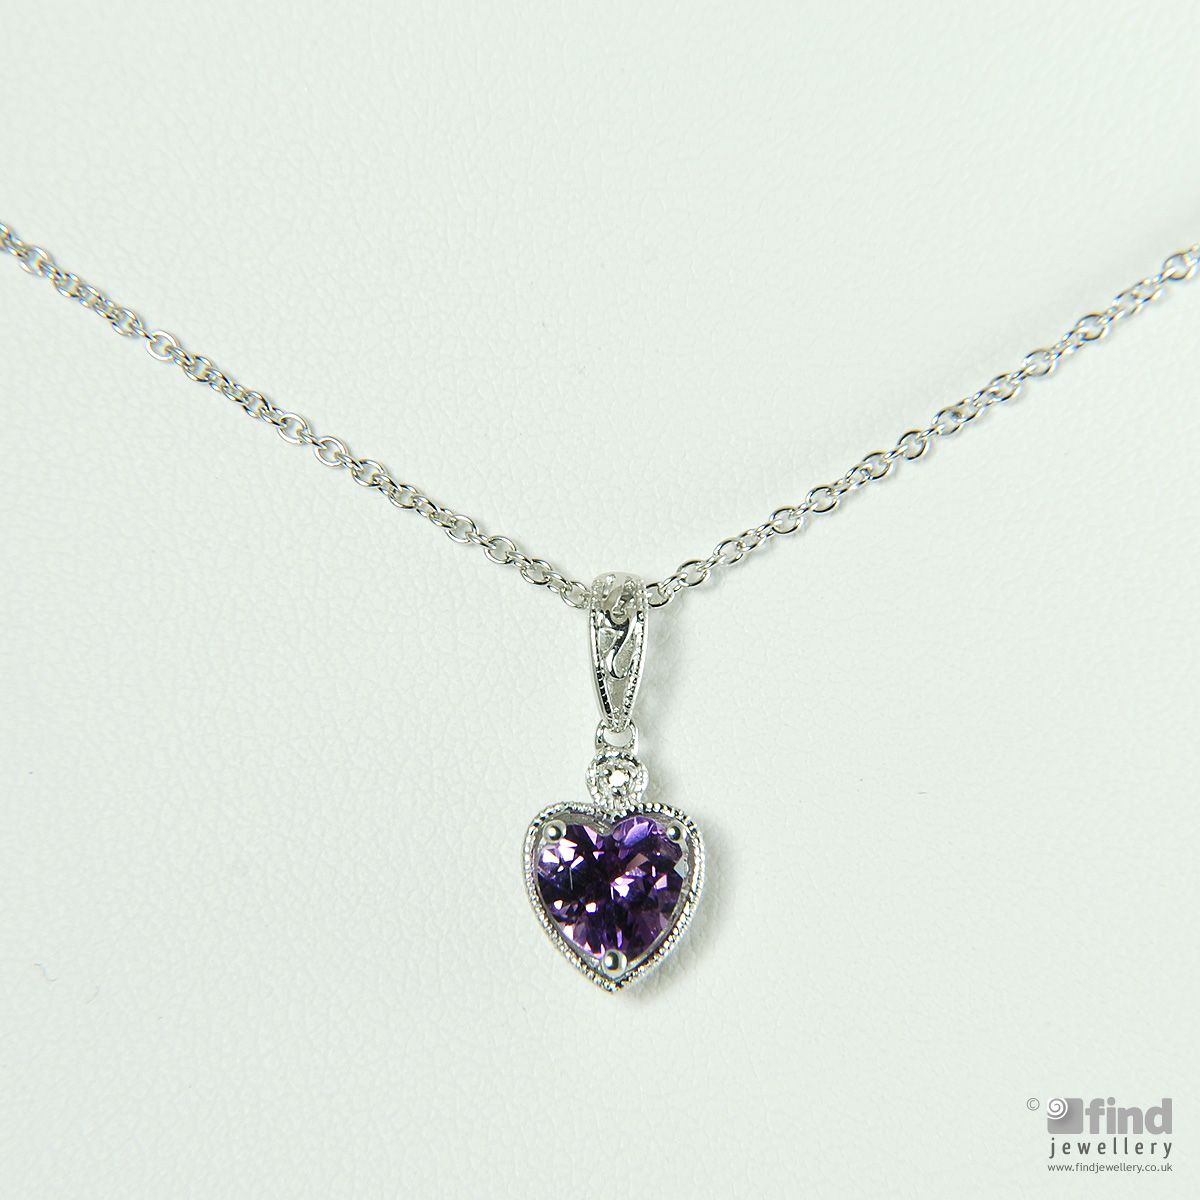 Unbranded 9ct White Gold Amethyst and Diamond Heart Necklace